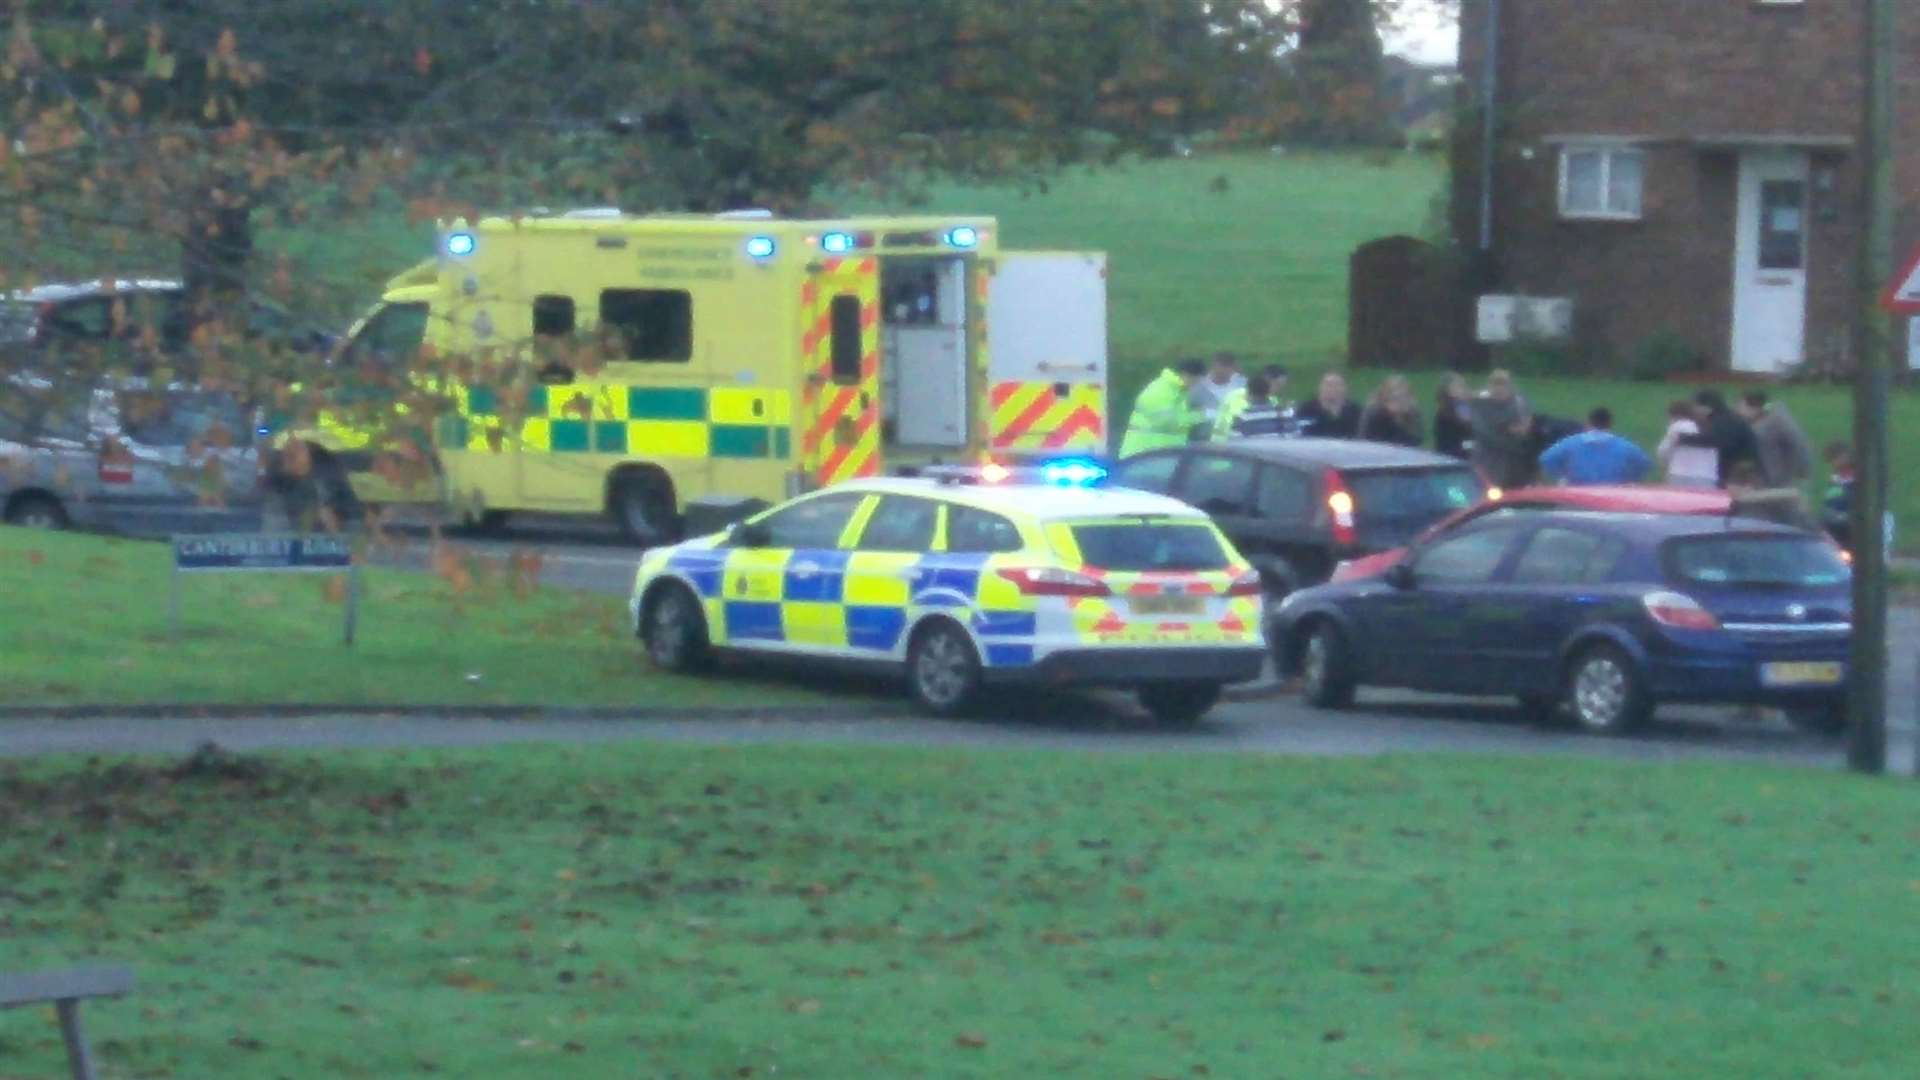 A 15-year-old Sittingbourne Community College student was injured after he was hit by a car near Commonwealth Close